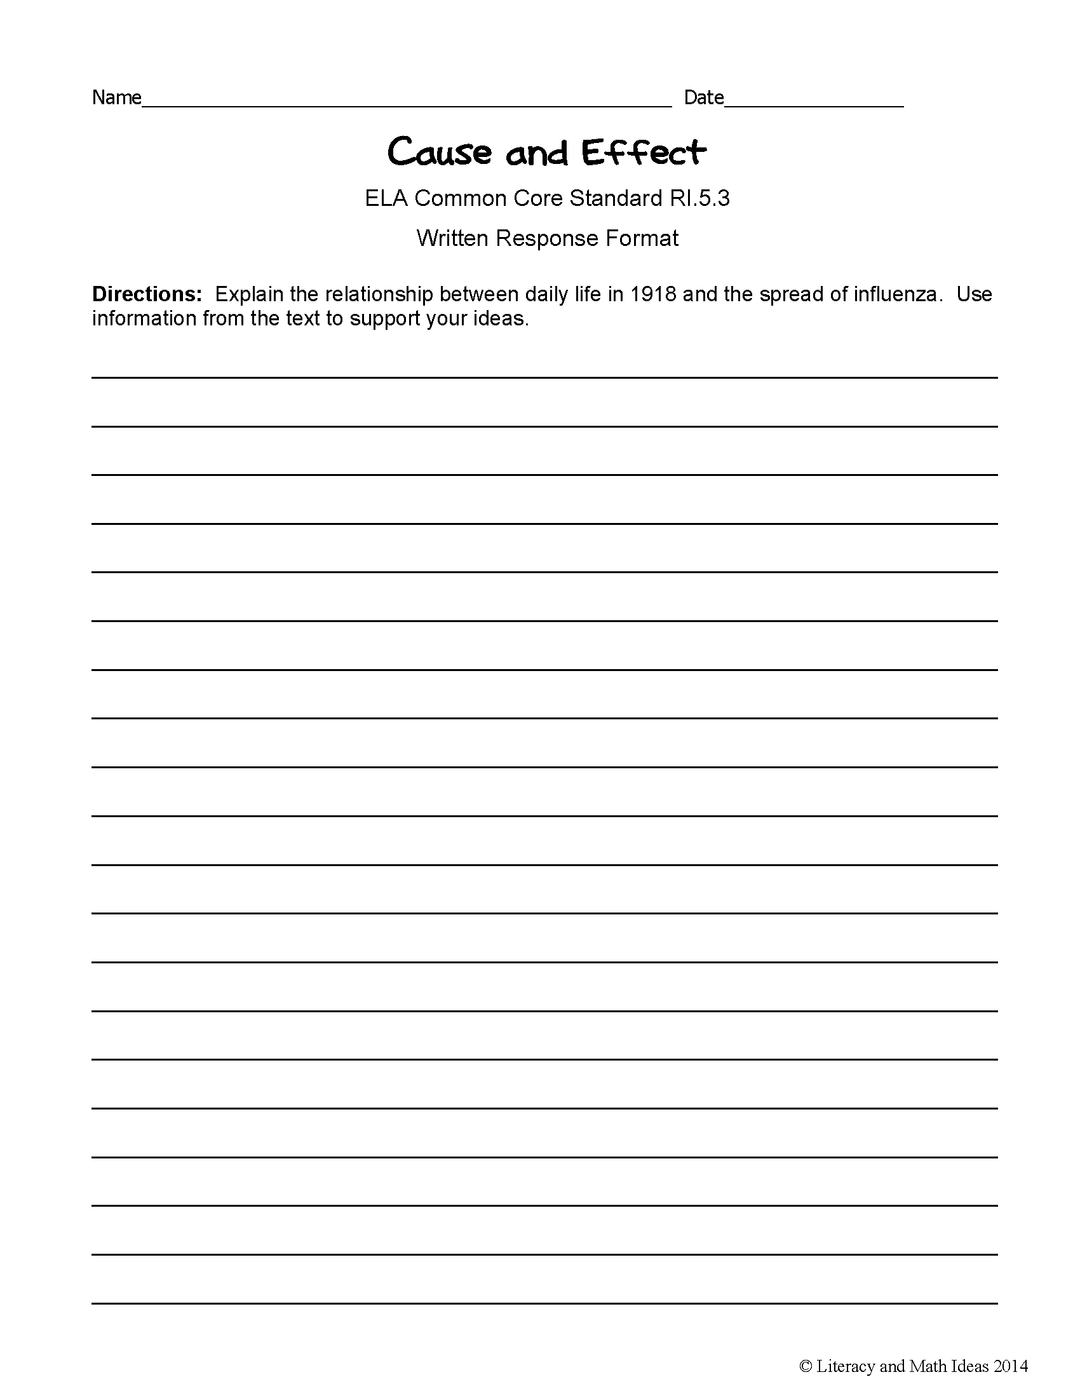 Grade 5 Common Core Assessments: Cause and Effect RI.5.3